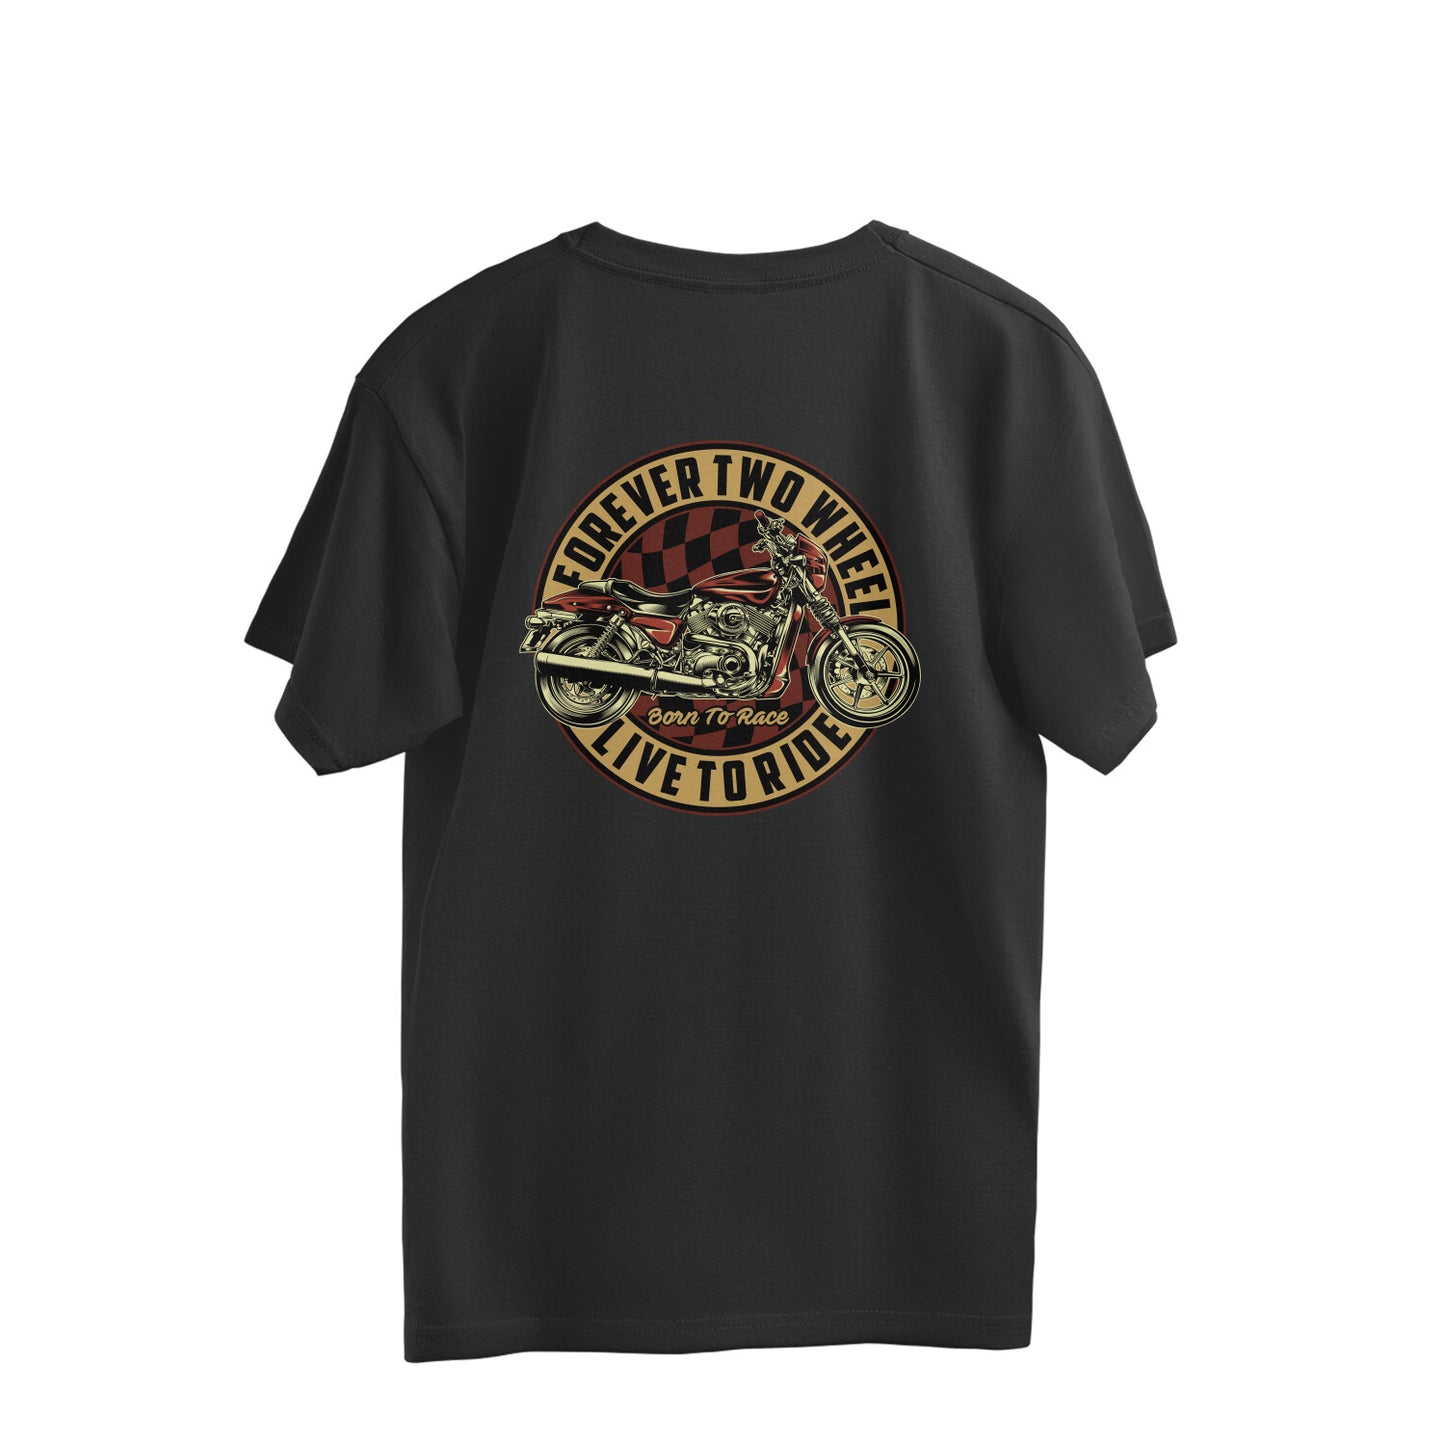 Forever two wheels - Live to ride (Back Printed) - Oversized Tee